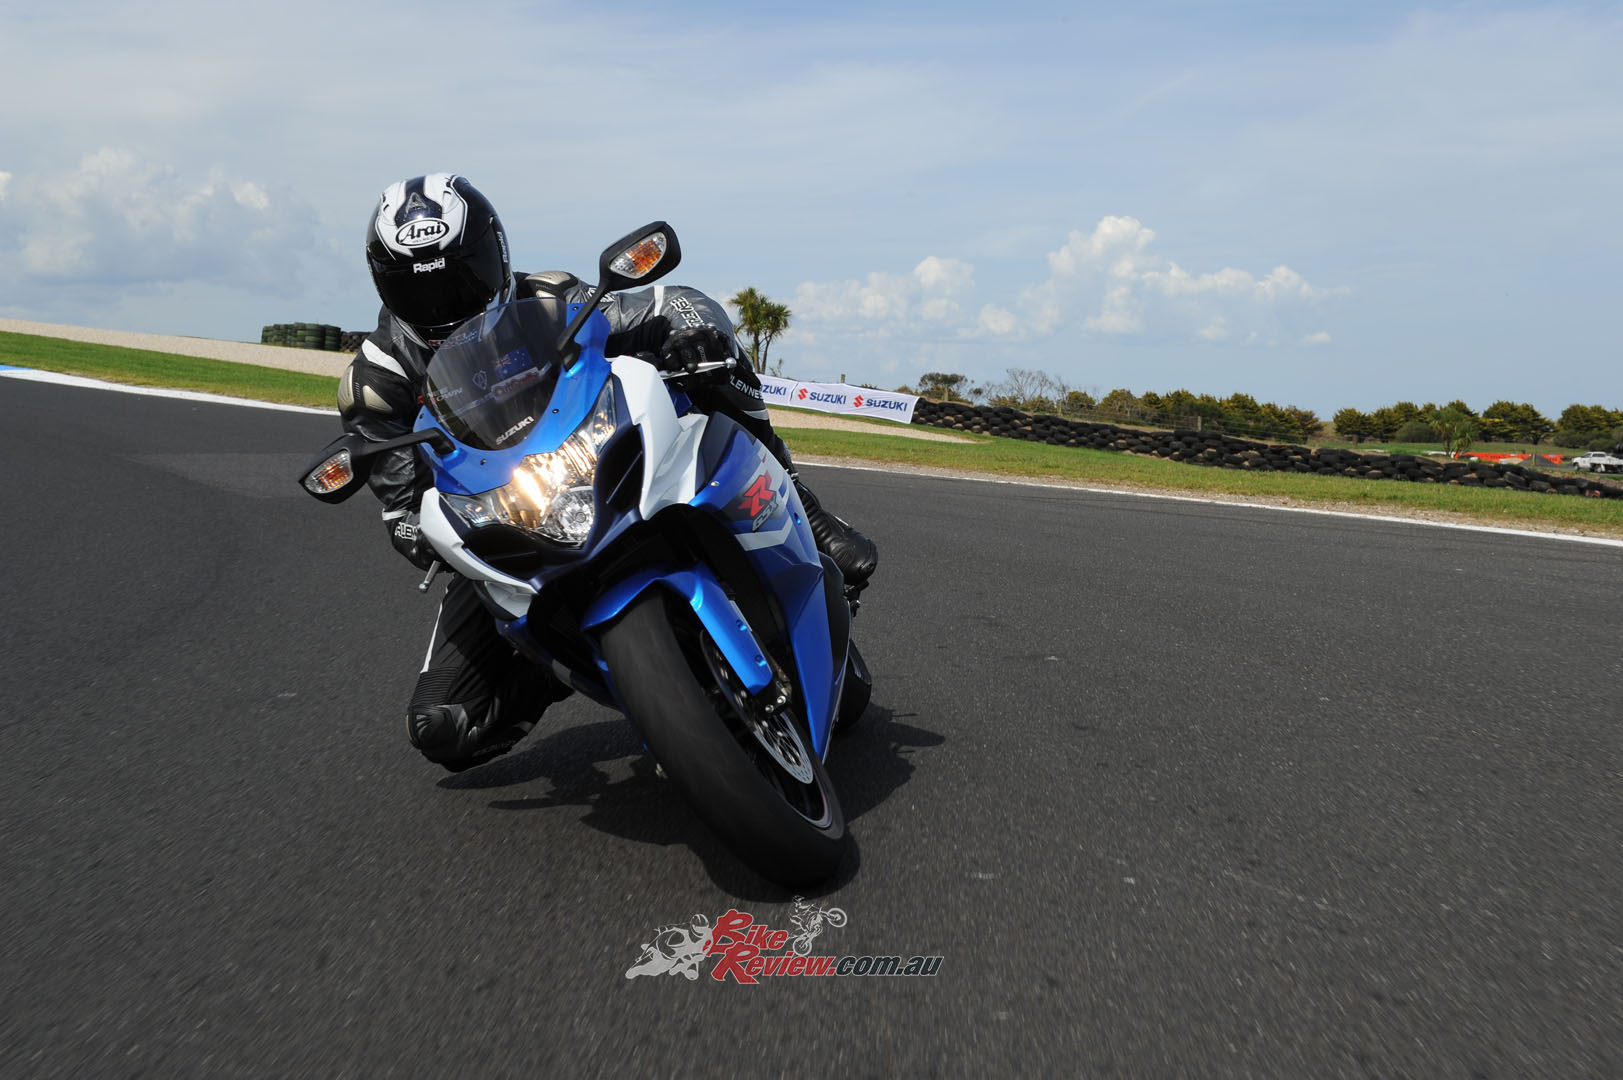 For 2012, Suzuki promised customers an even better GSX-R1000 and, after close to 60 laps of Phillip Island on the new Gixer, Jeff said that Suzuki had delivered the goods. 